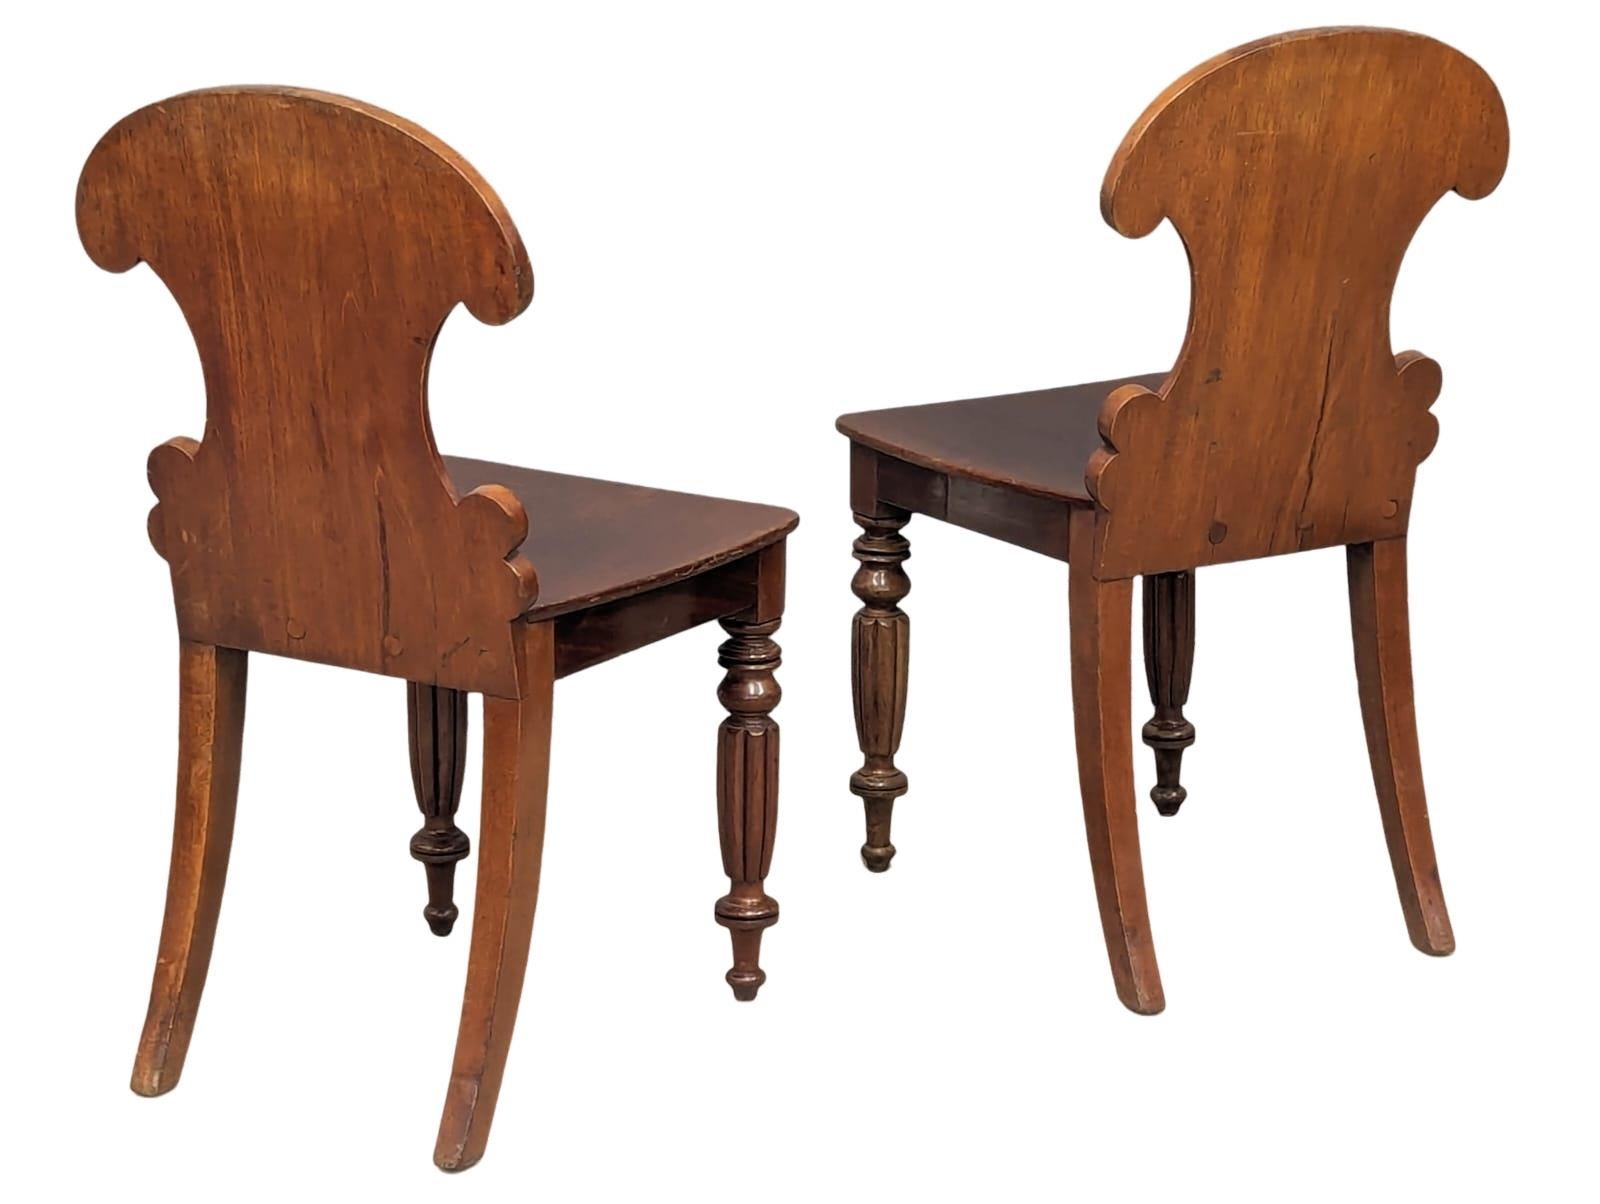 A pair of late George IV-Early William IV ornate mahogany hall chairs - Image 6 of 6